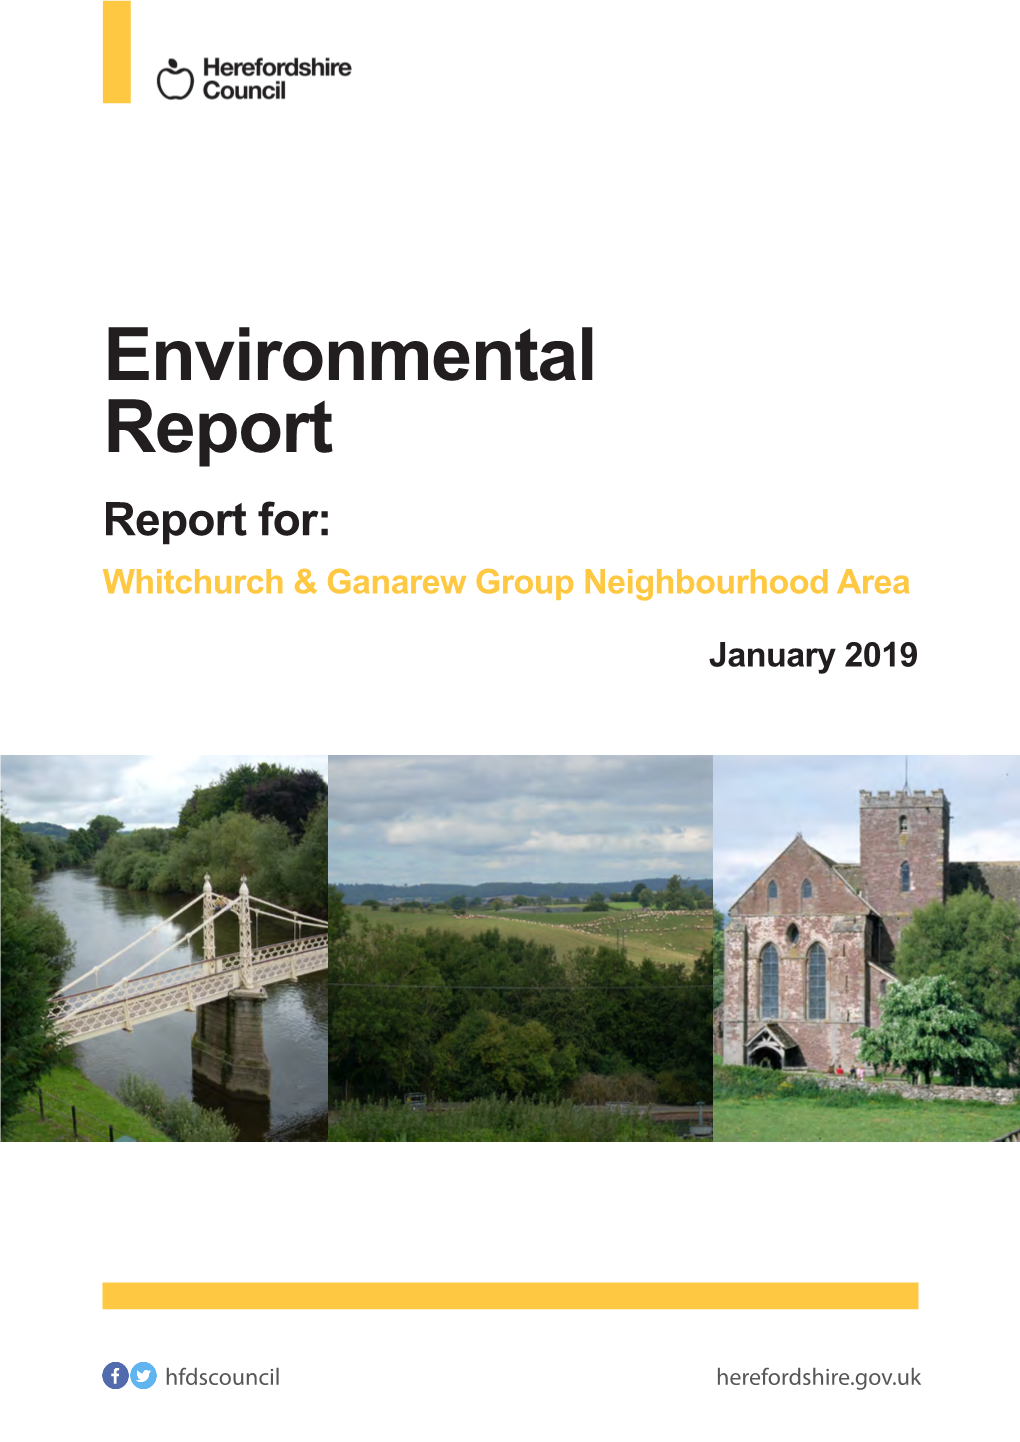 Whitchurch and Ganarew Environmental Report January 2019